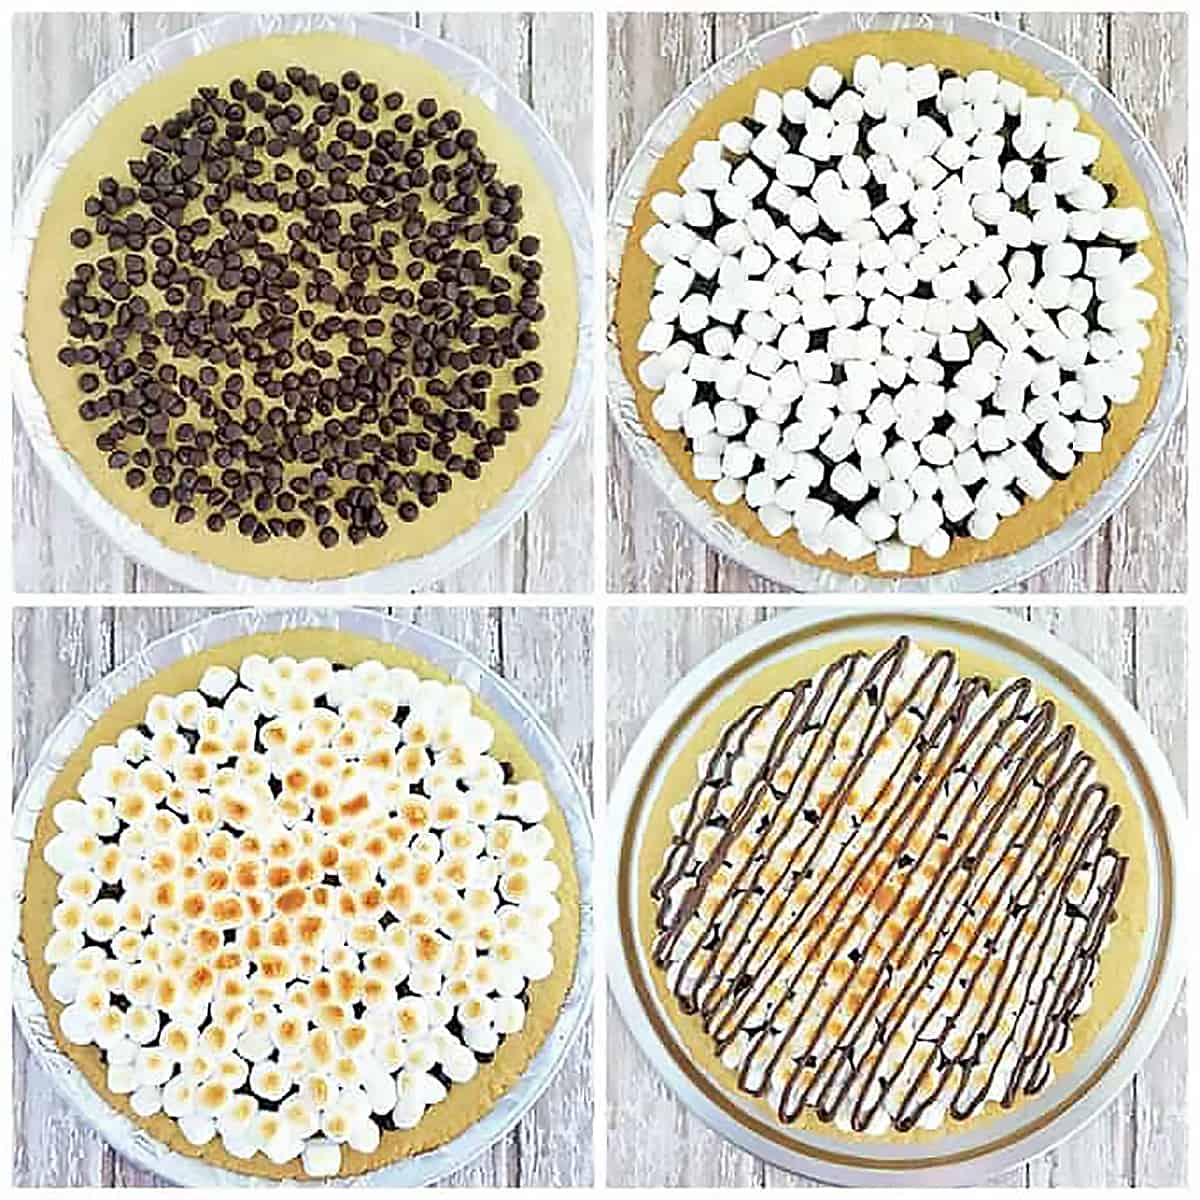 This S'mores Dessert Pizza crust is made out of the Easy Homemade Sugar Cookie Dough Recipe. The baked pizza tastes just like your typical S'mores. And it’s super easy to make!